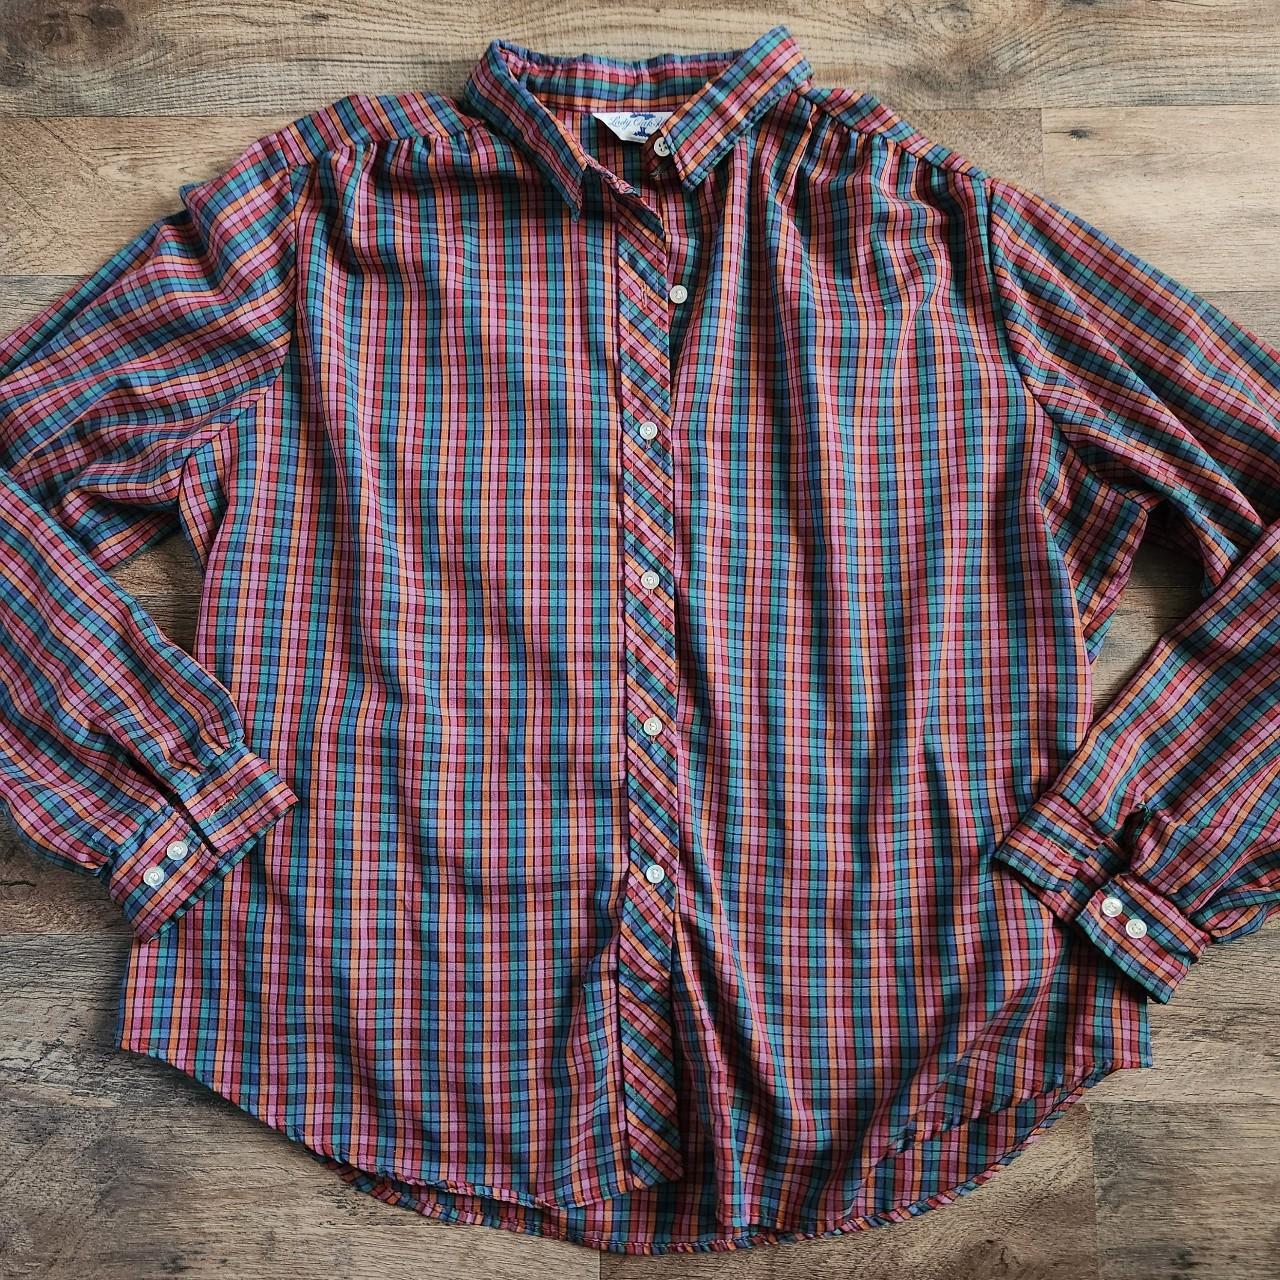 item listed by dyevintage